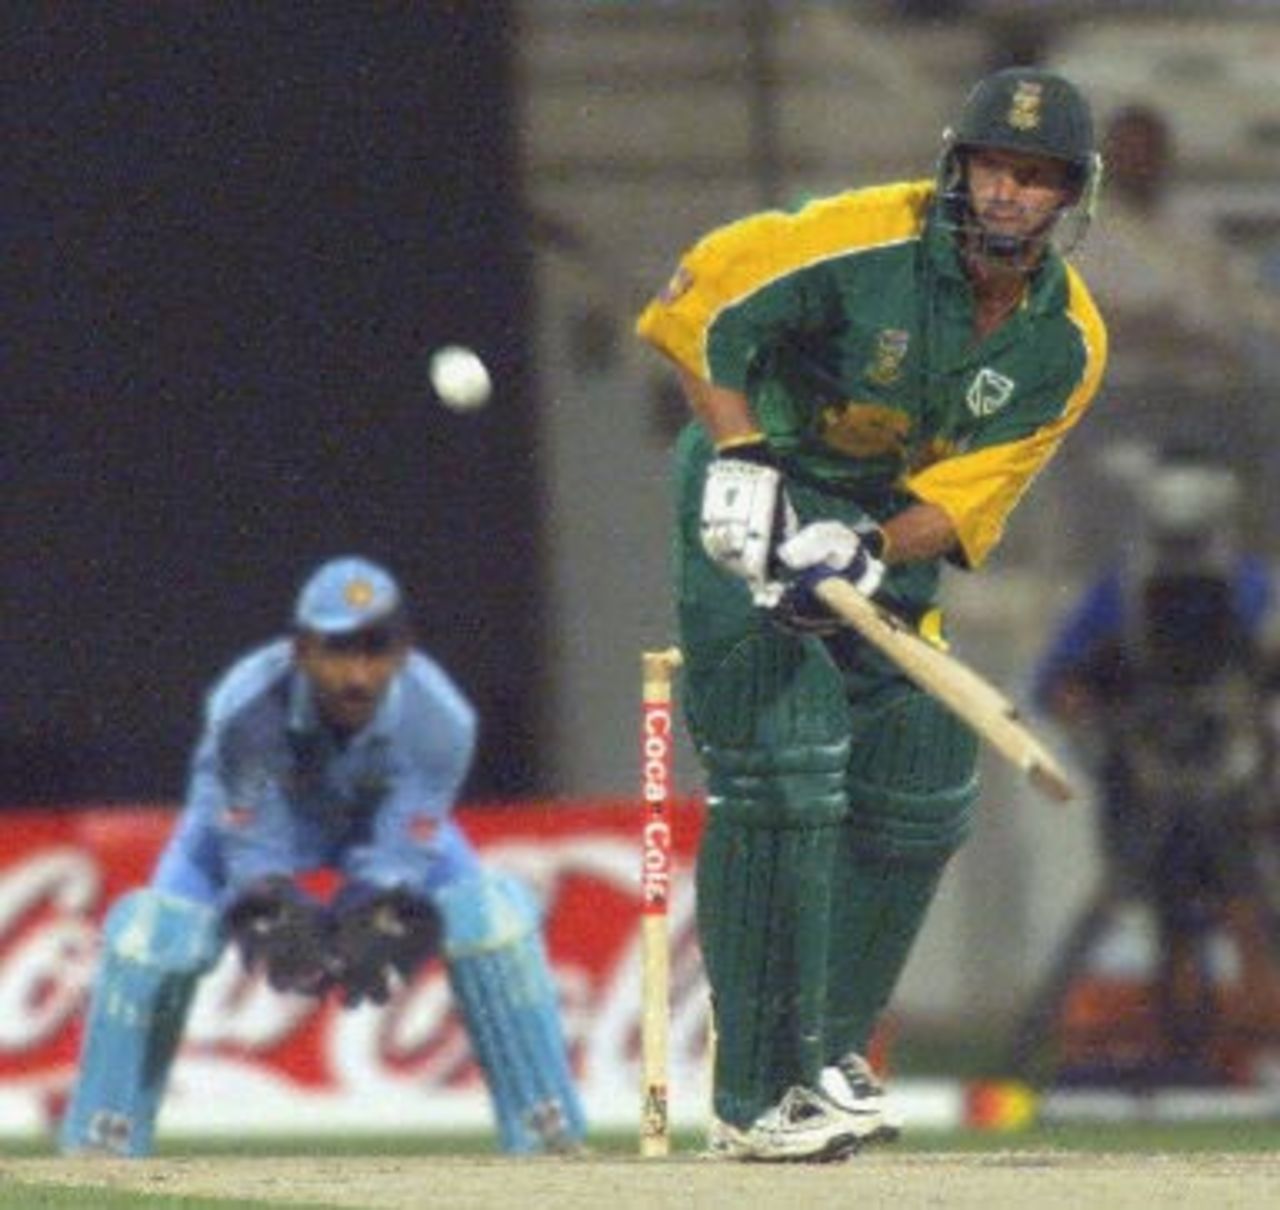 South African Gary Kirsten bats against India at the three-nation Sharjah Cup, 27 March 2000.